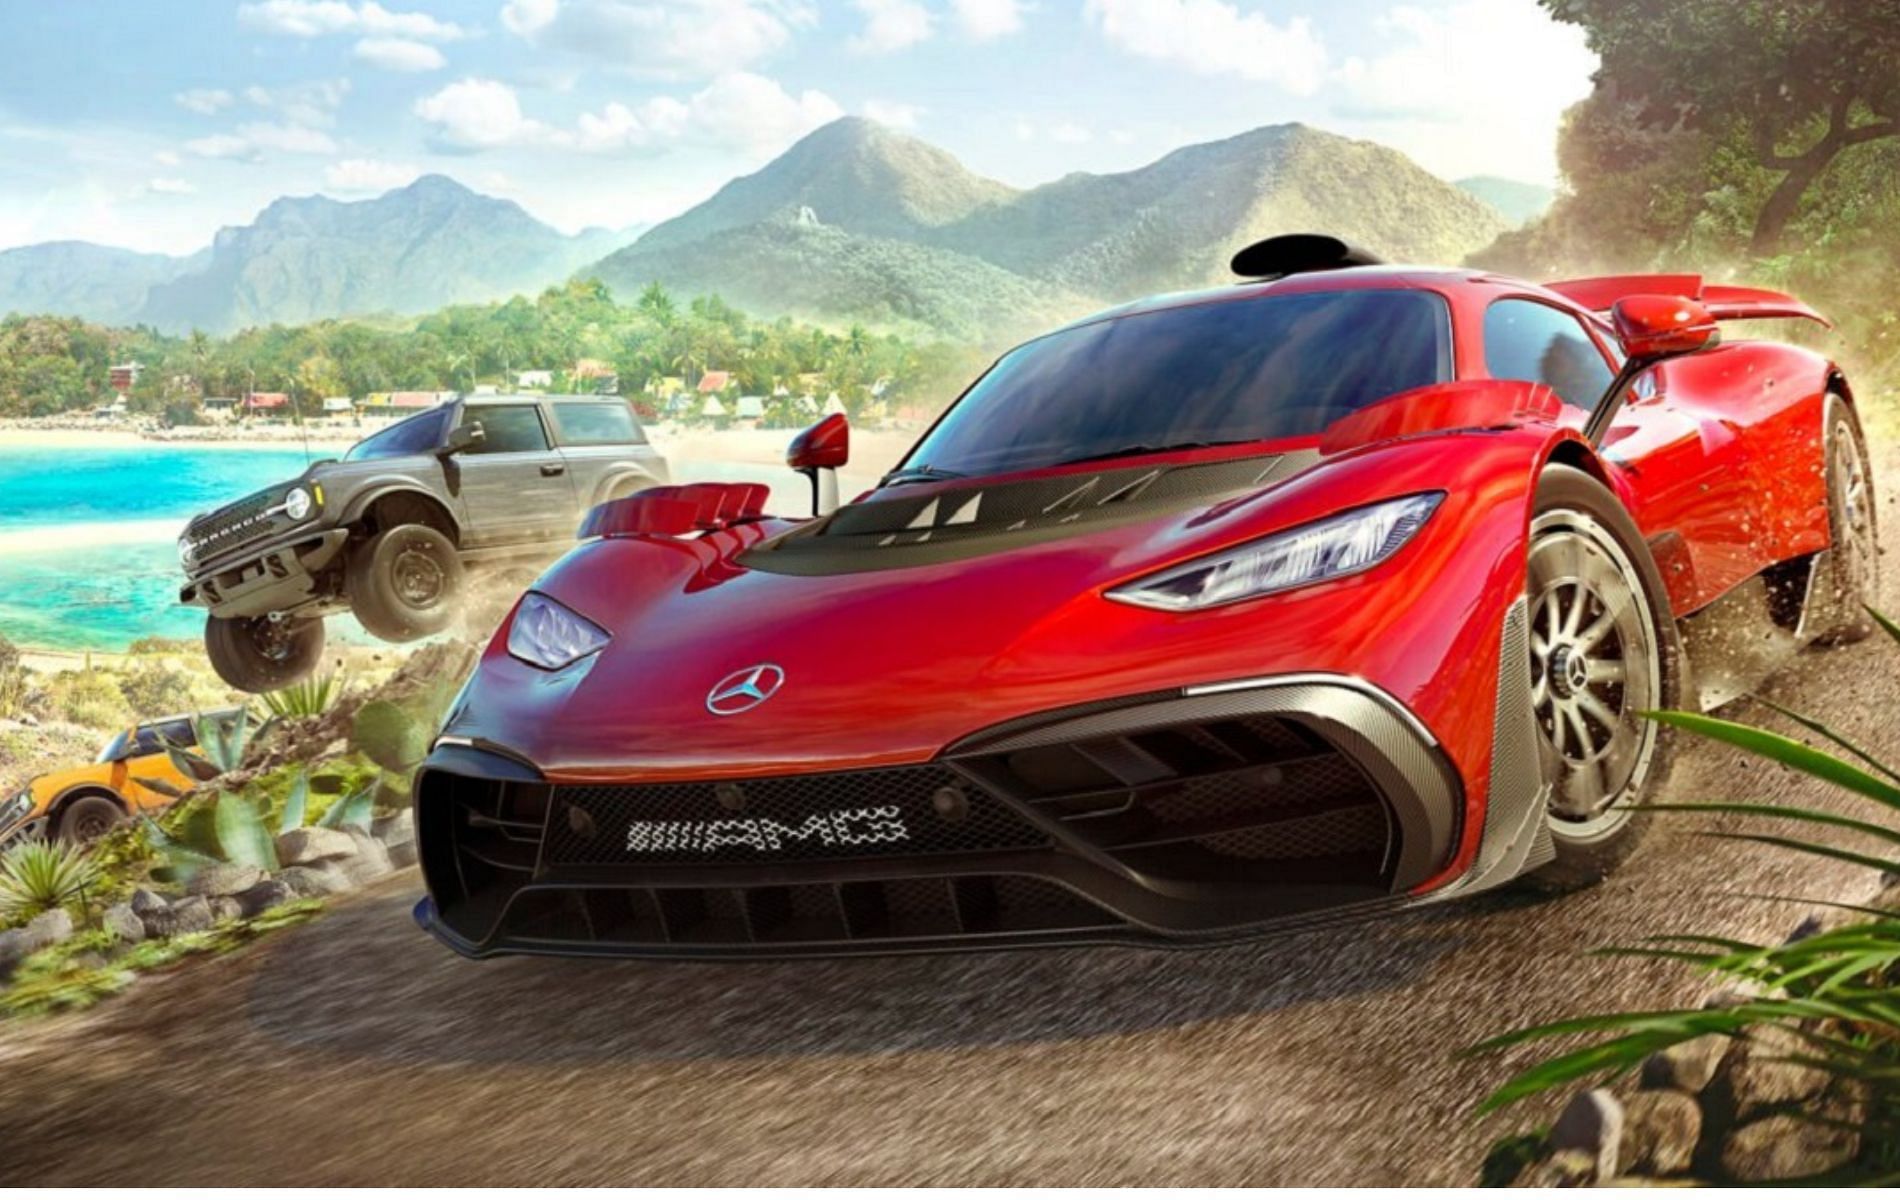 Forza Horizon 5 review: the best modern open world driving game